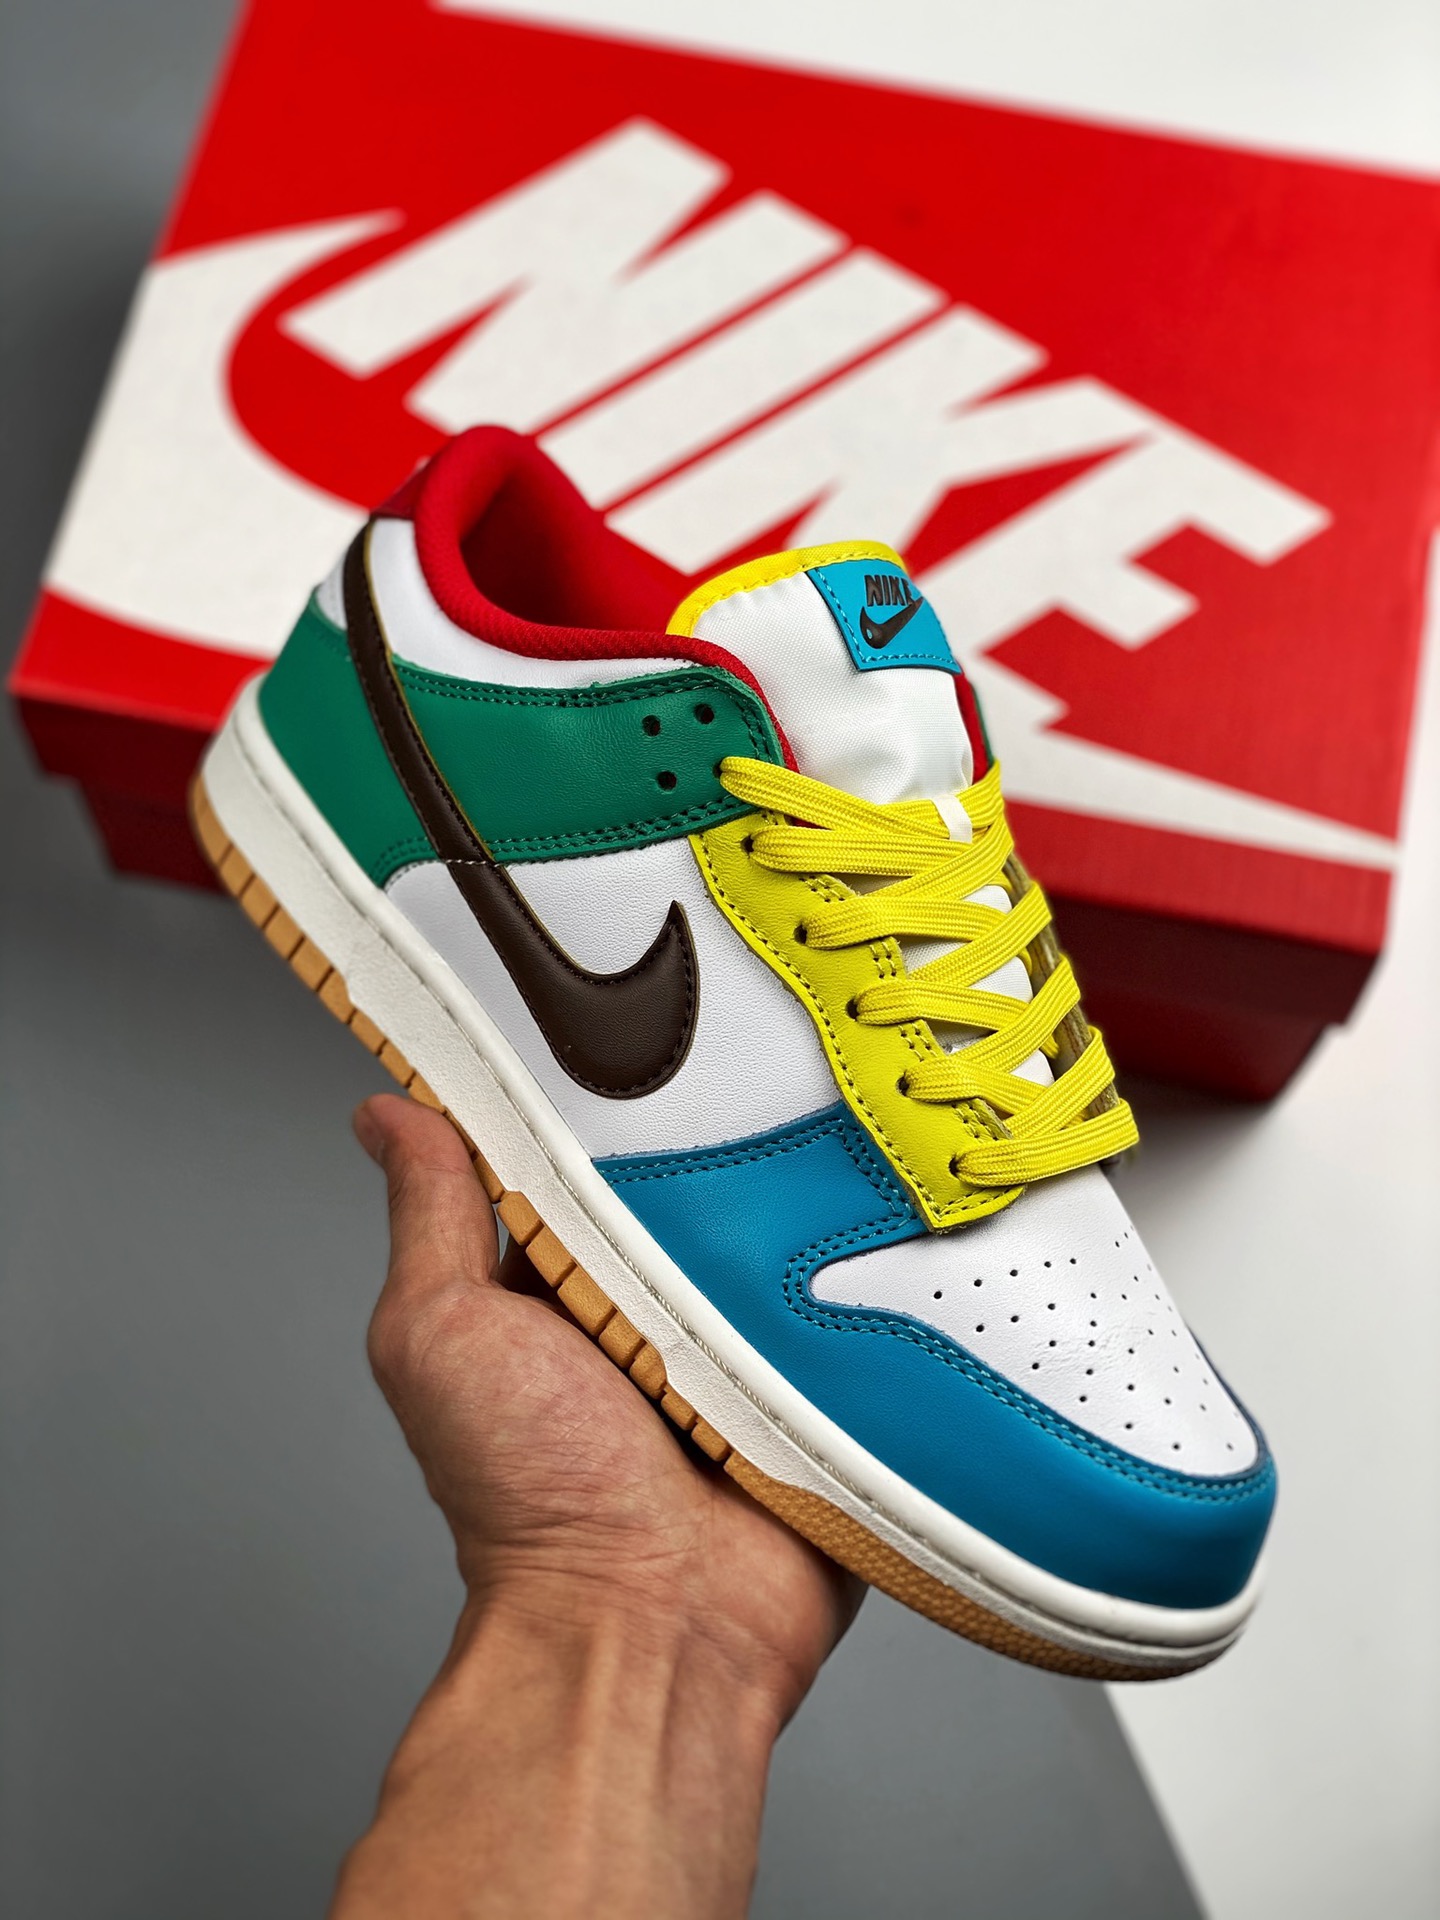 Nike Dunk Low SE “Free 99” White/Light Chocolate-Roma Green For 